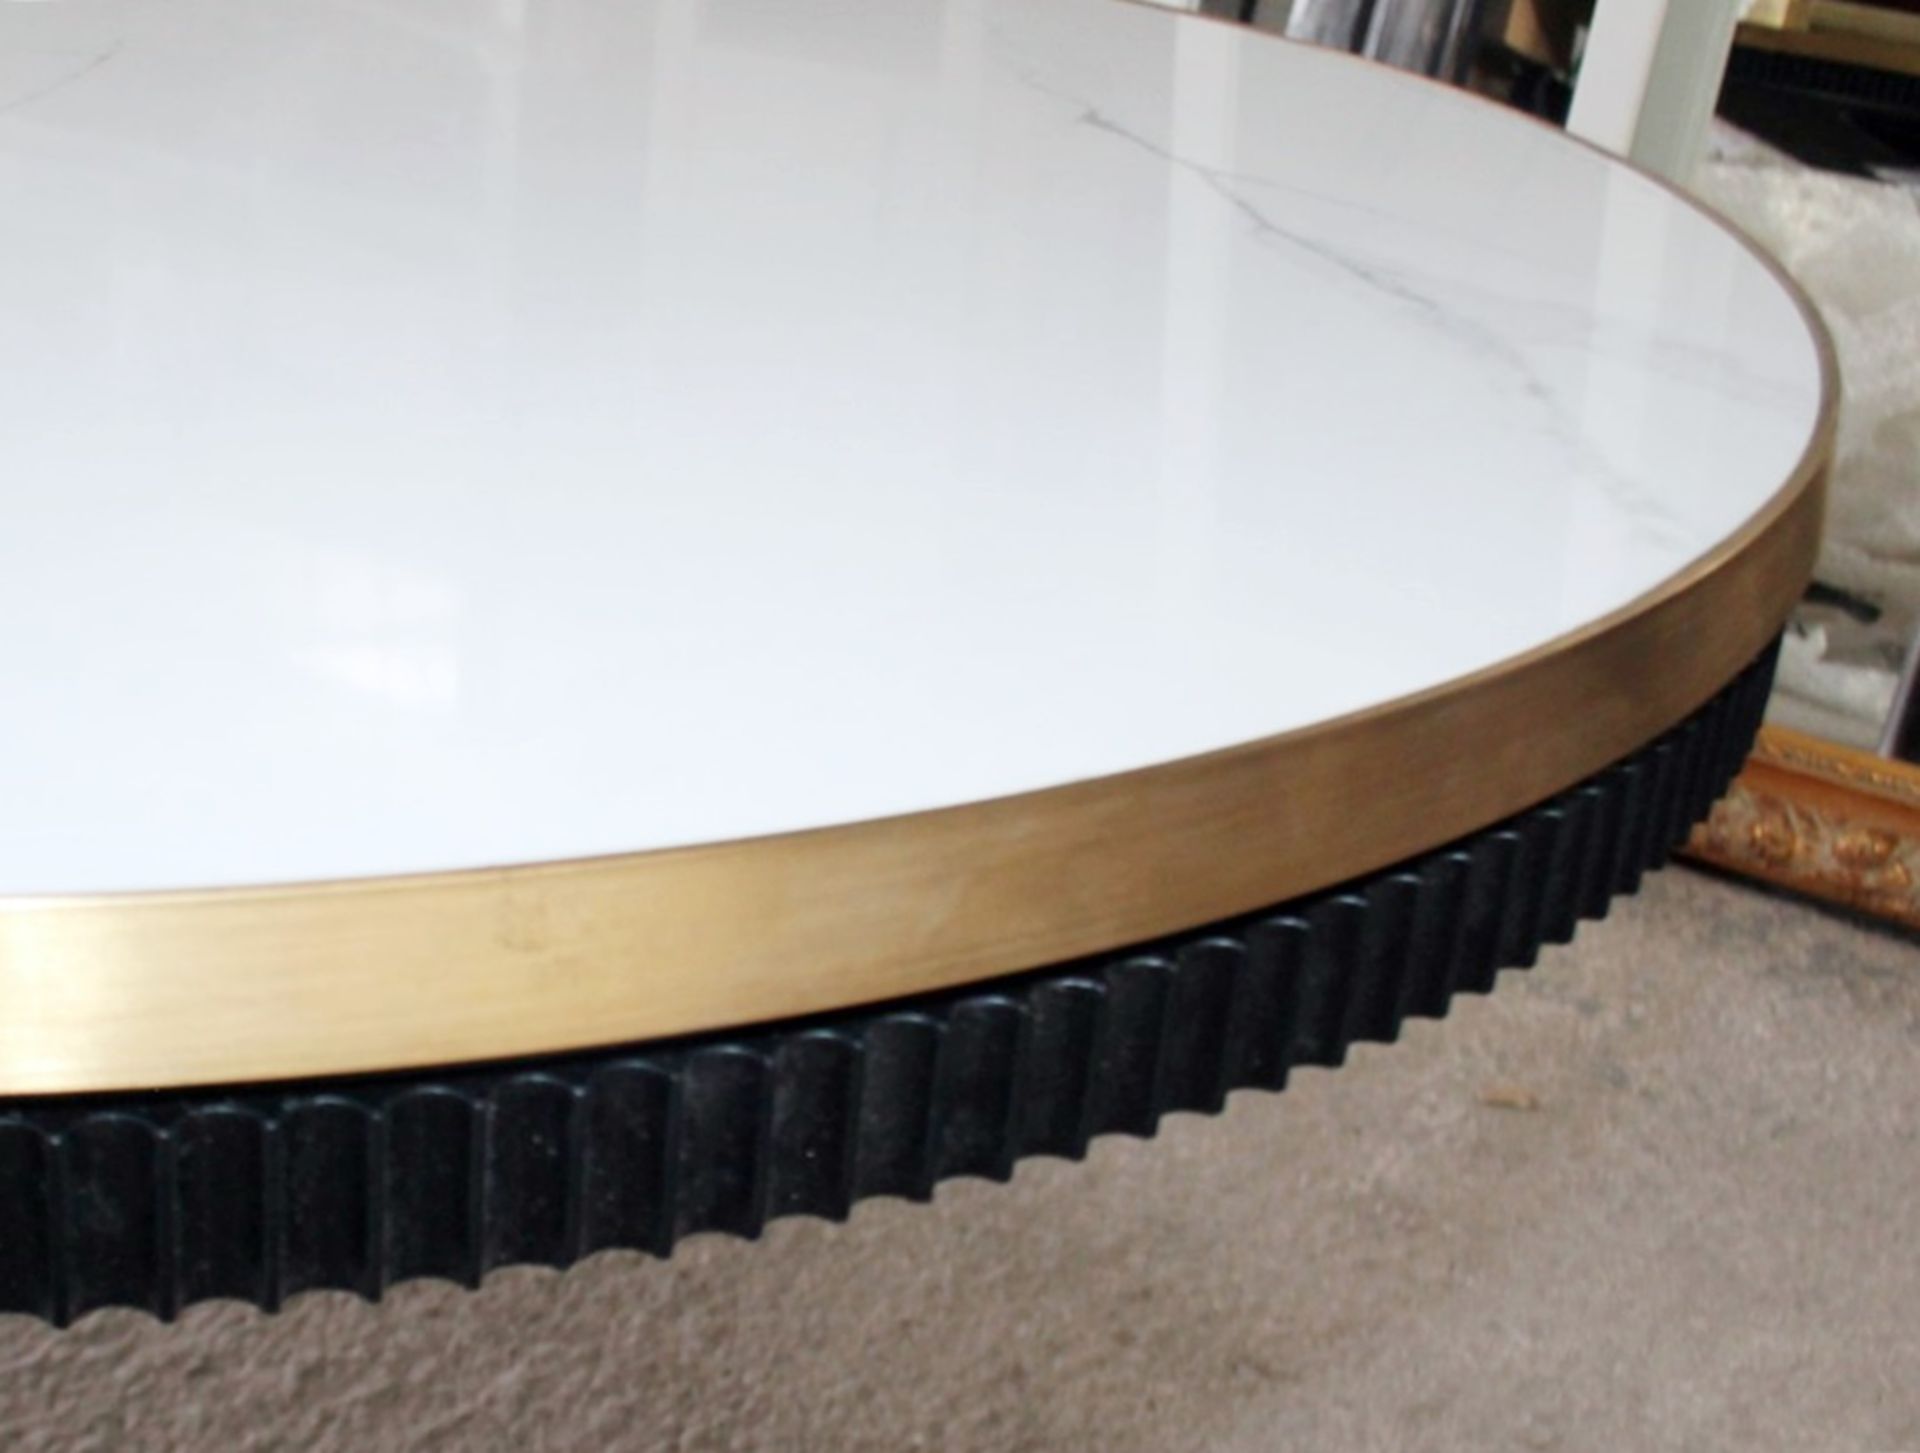 1 x Specially Commissioned Industrial-Style Marble-Topped U-Shaped Bistro Table With A Brass Trim - - Image 6 of 9